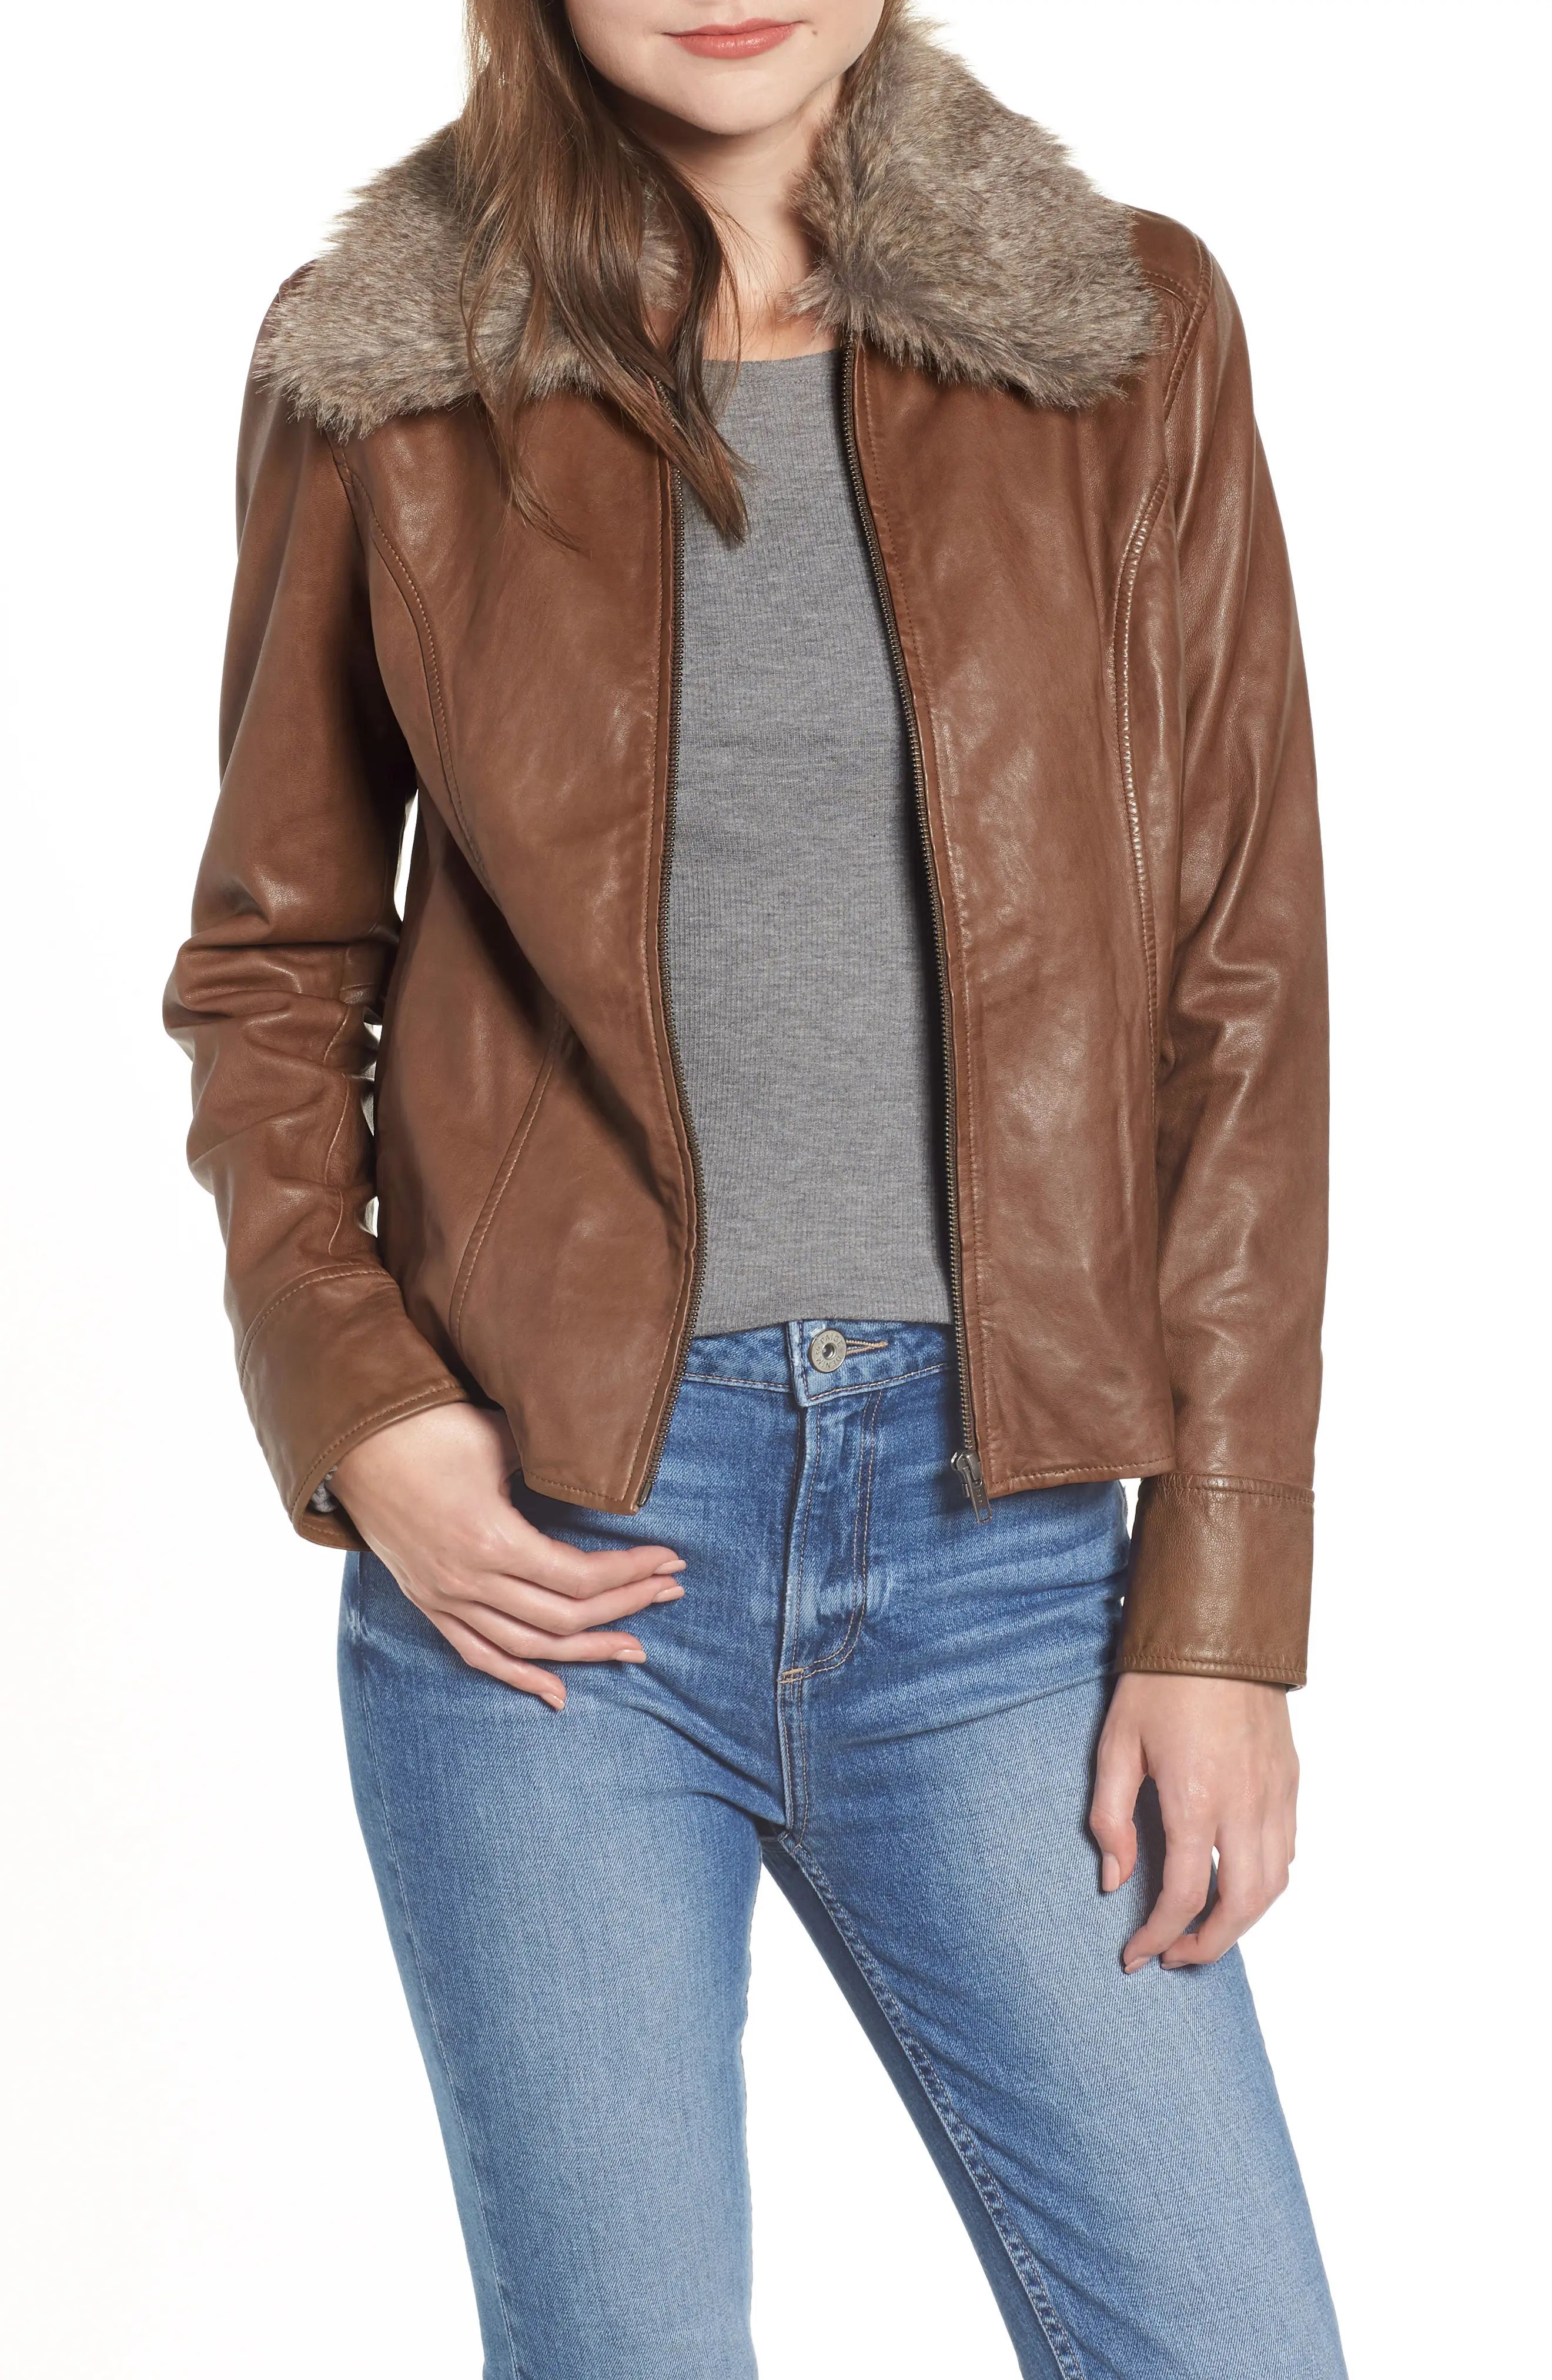 Women's Hinge Faux Fur Collar Leather Jacket, Size XX-Small - Brown | Nordstrom